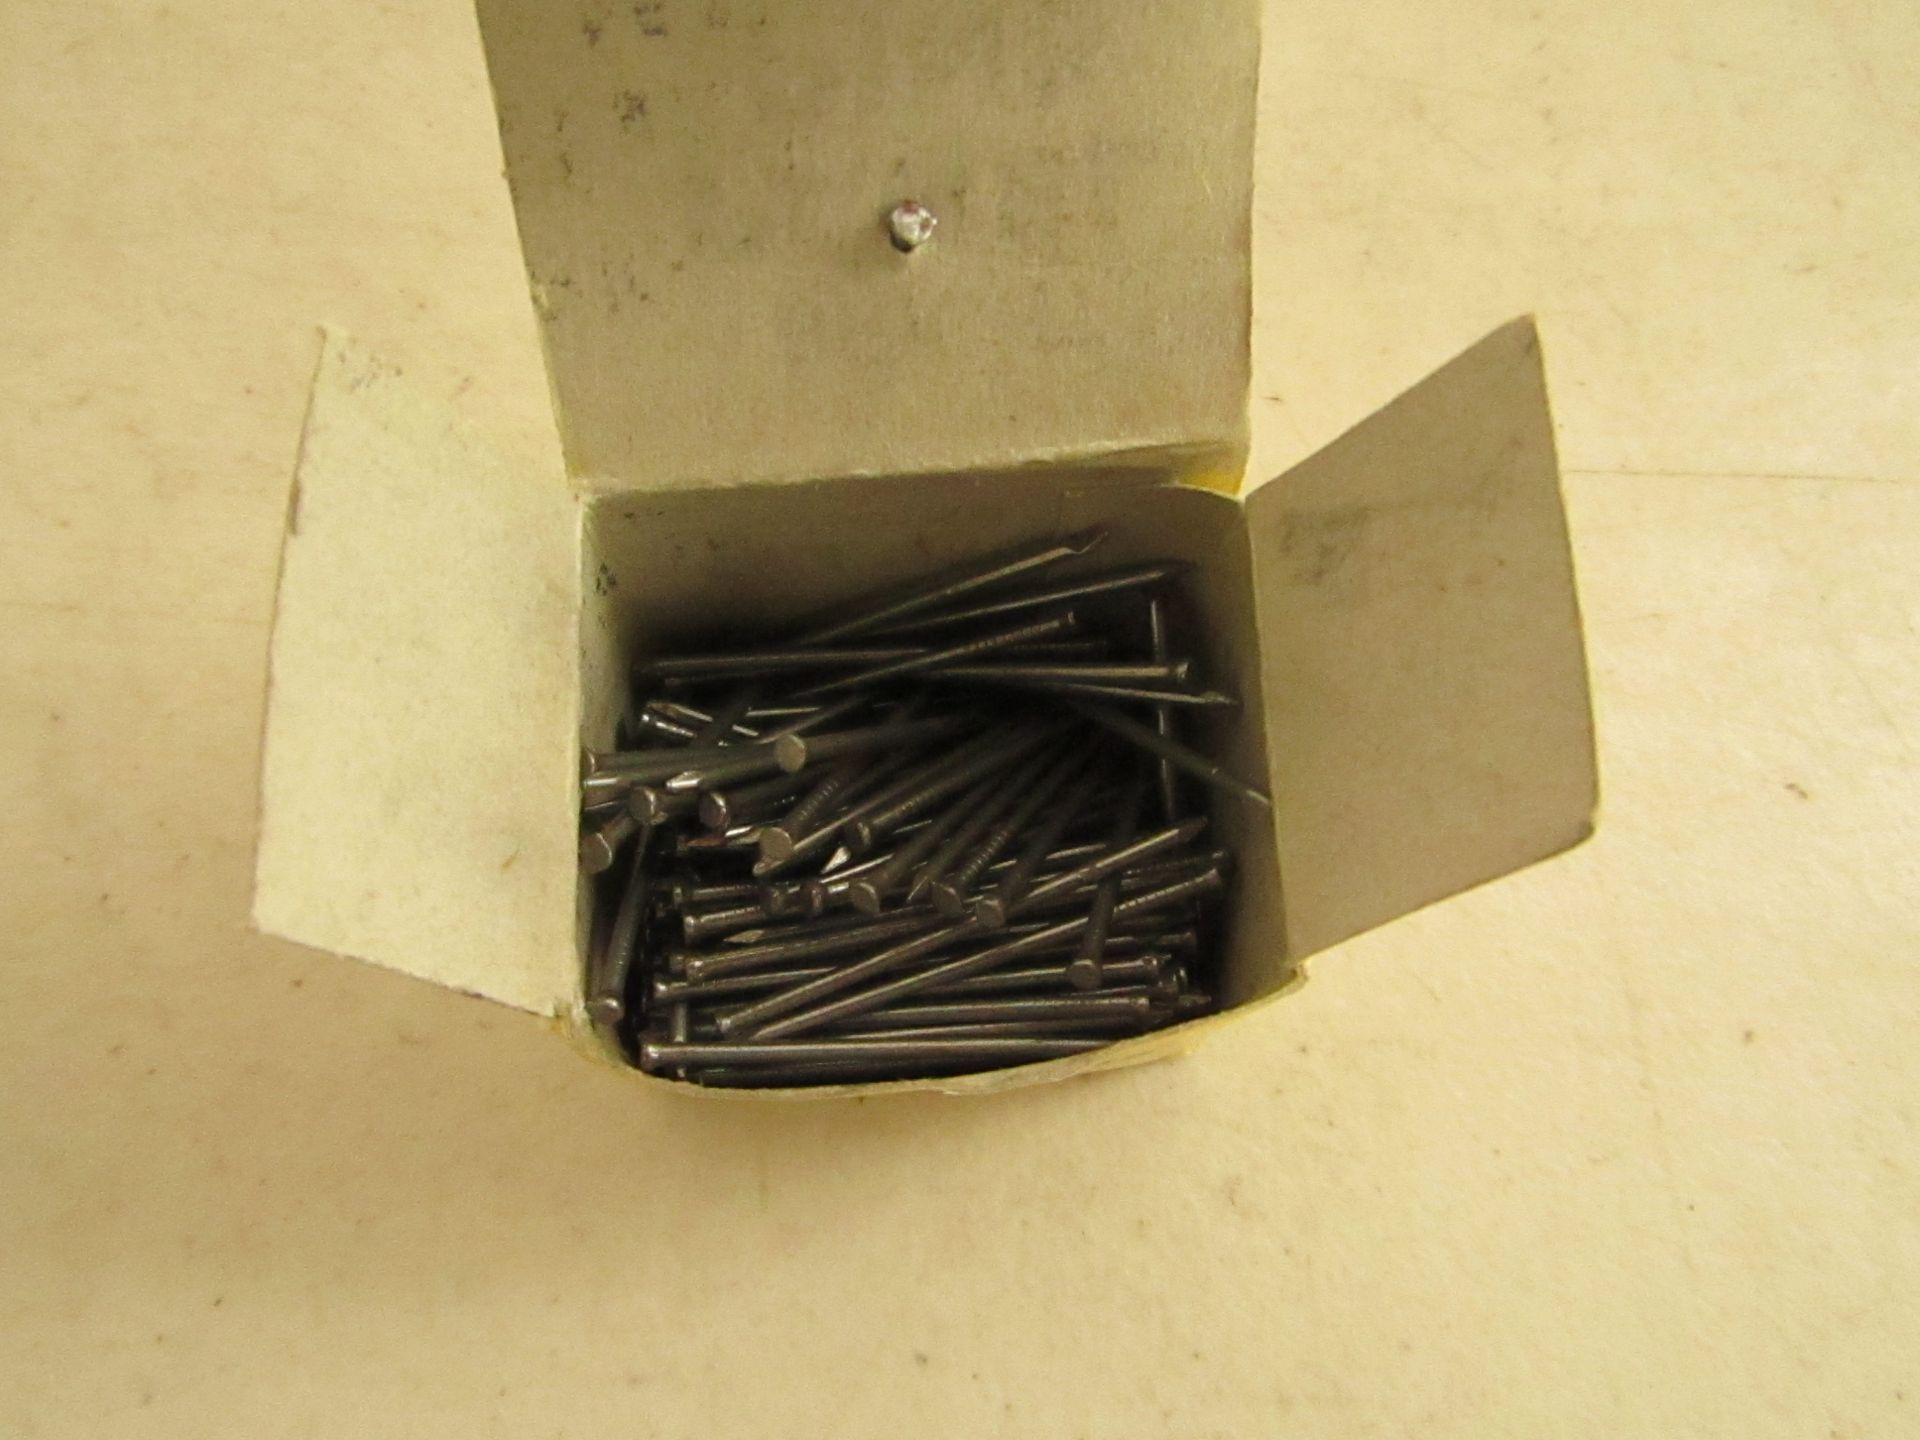 10x Boxes each containing 100g net weight of bright panel pins, all boxed.